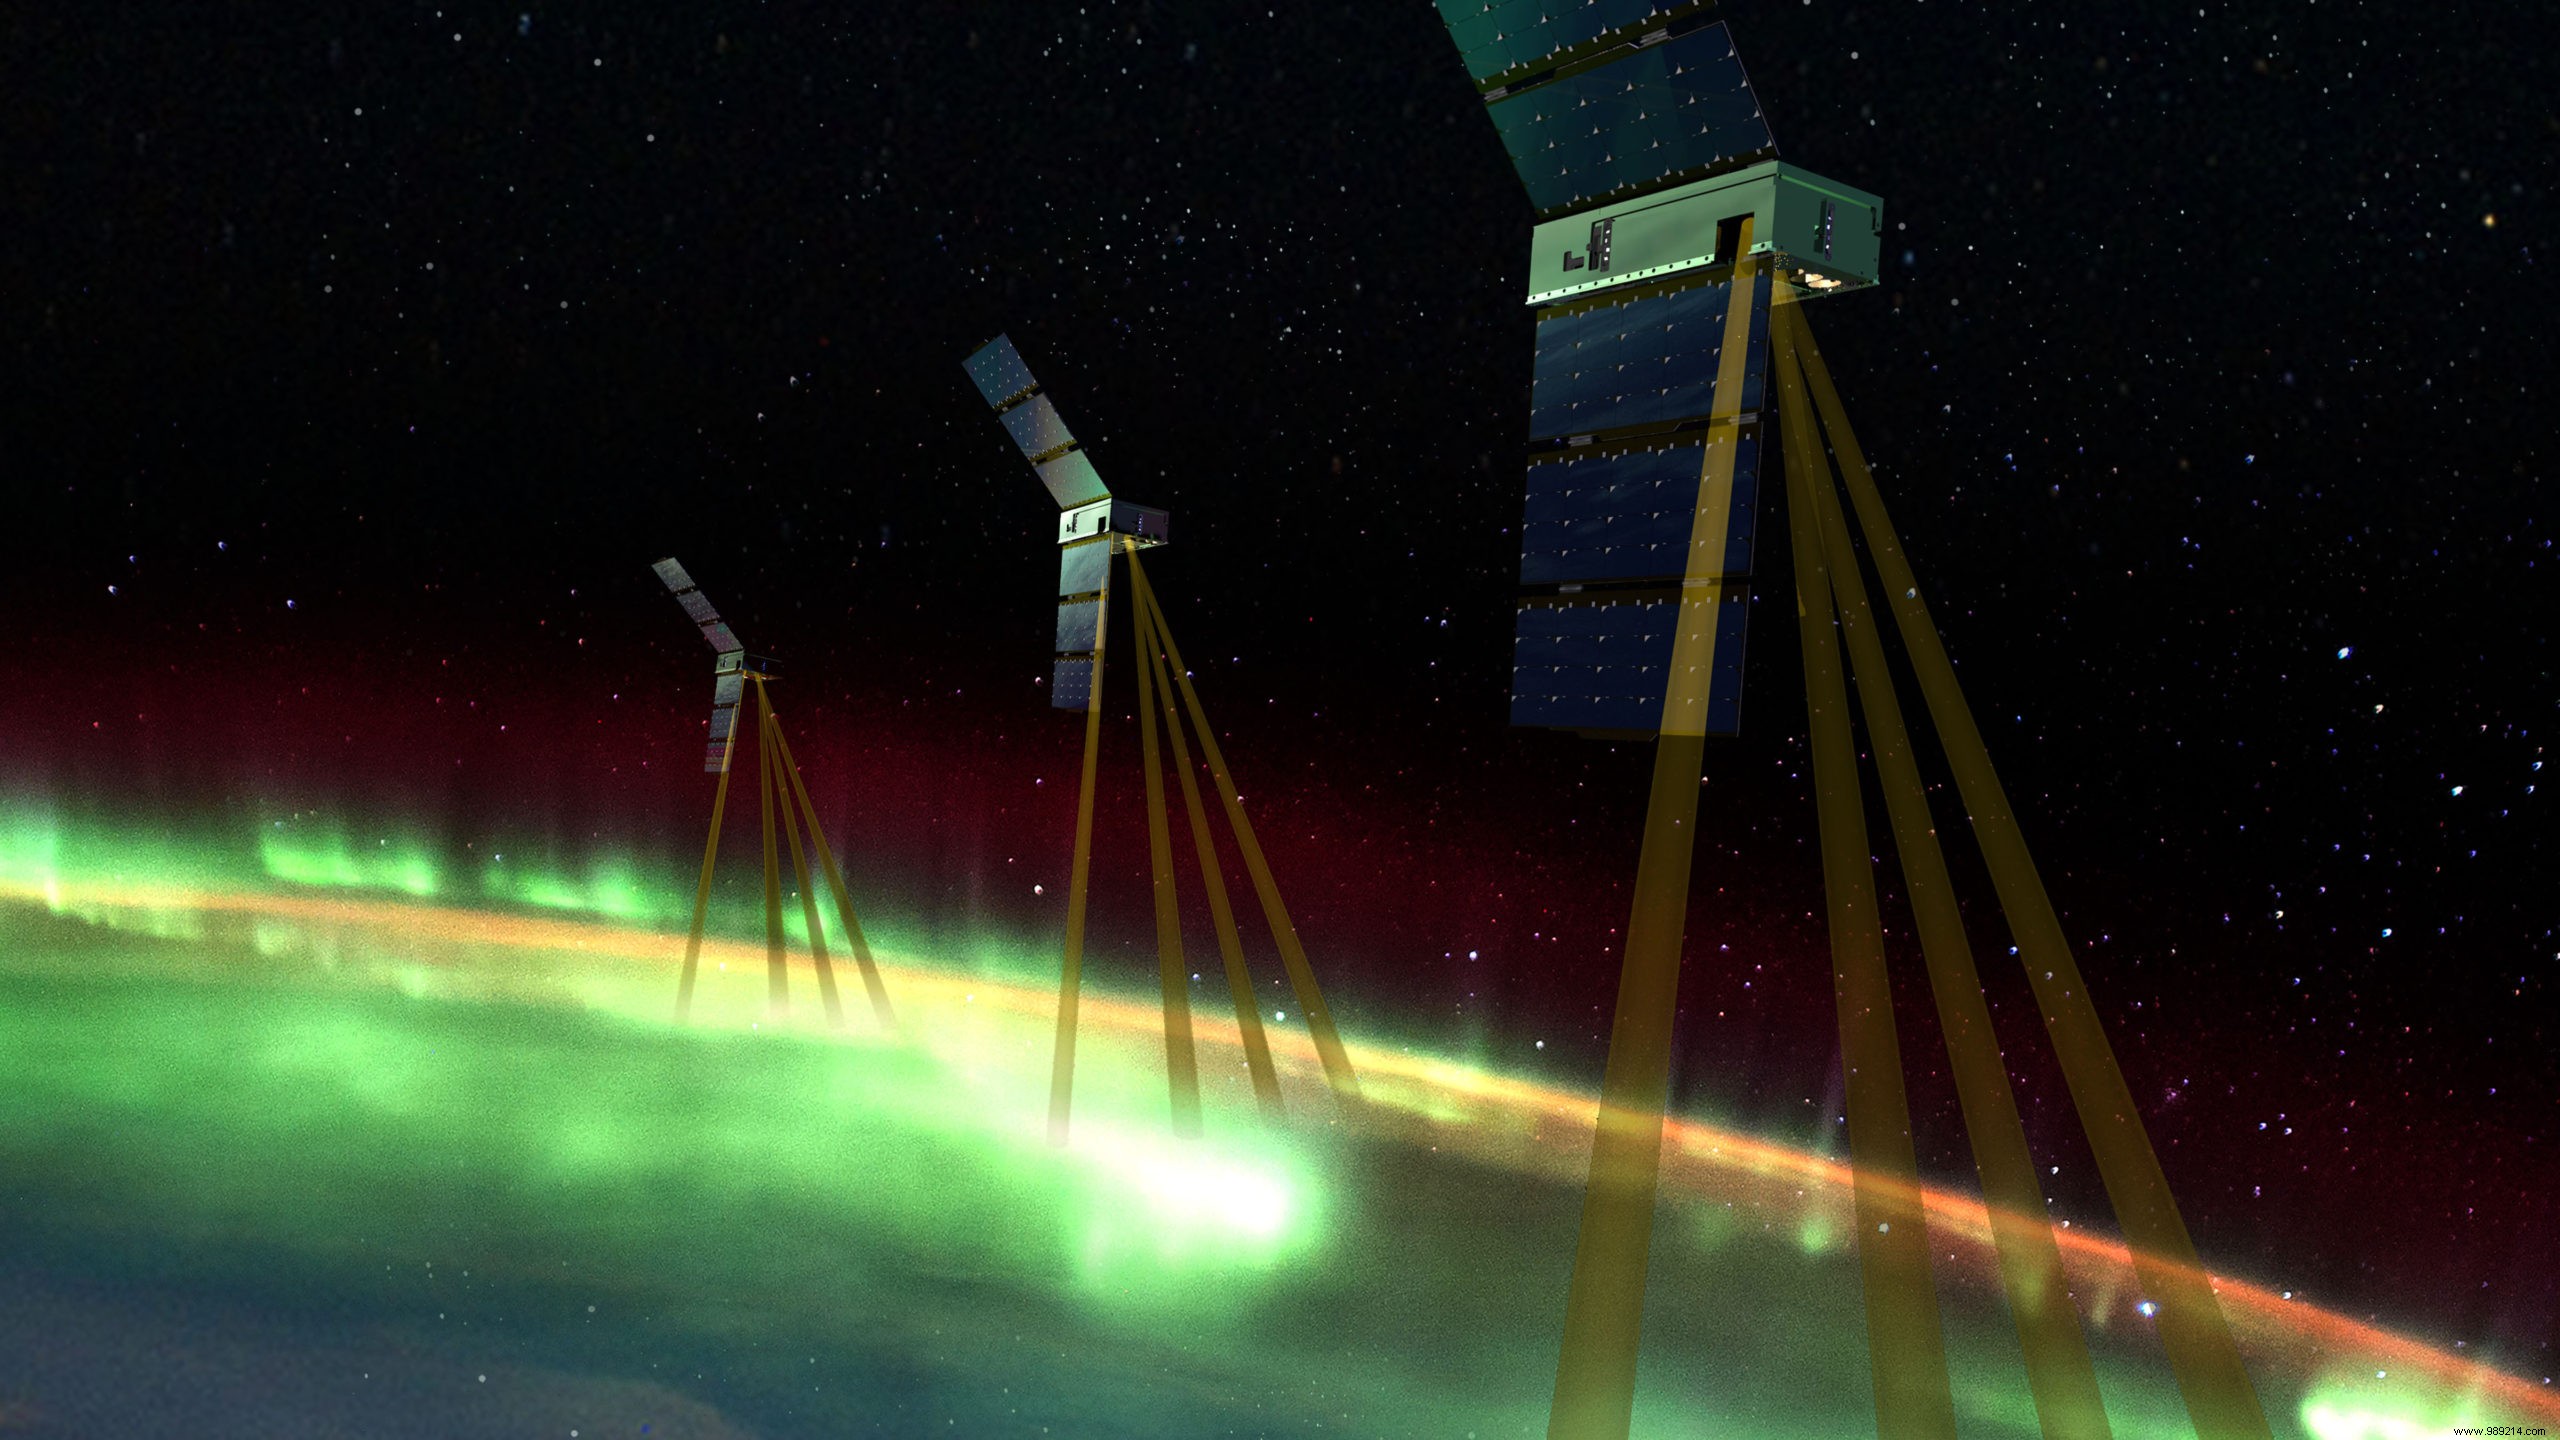 Two missions will study space weather threatening Earth 